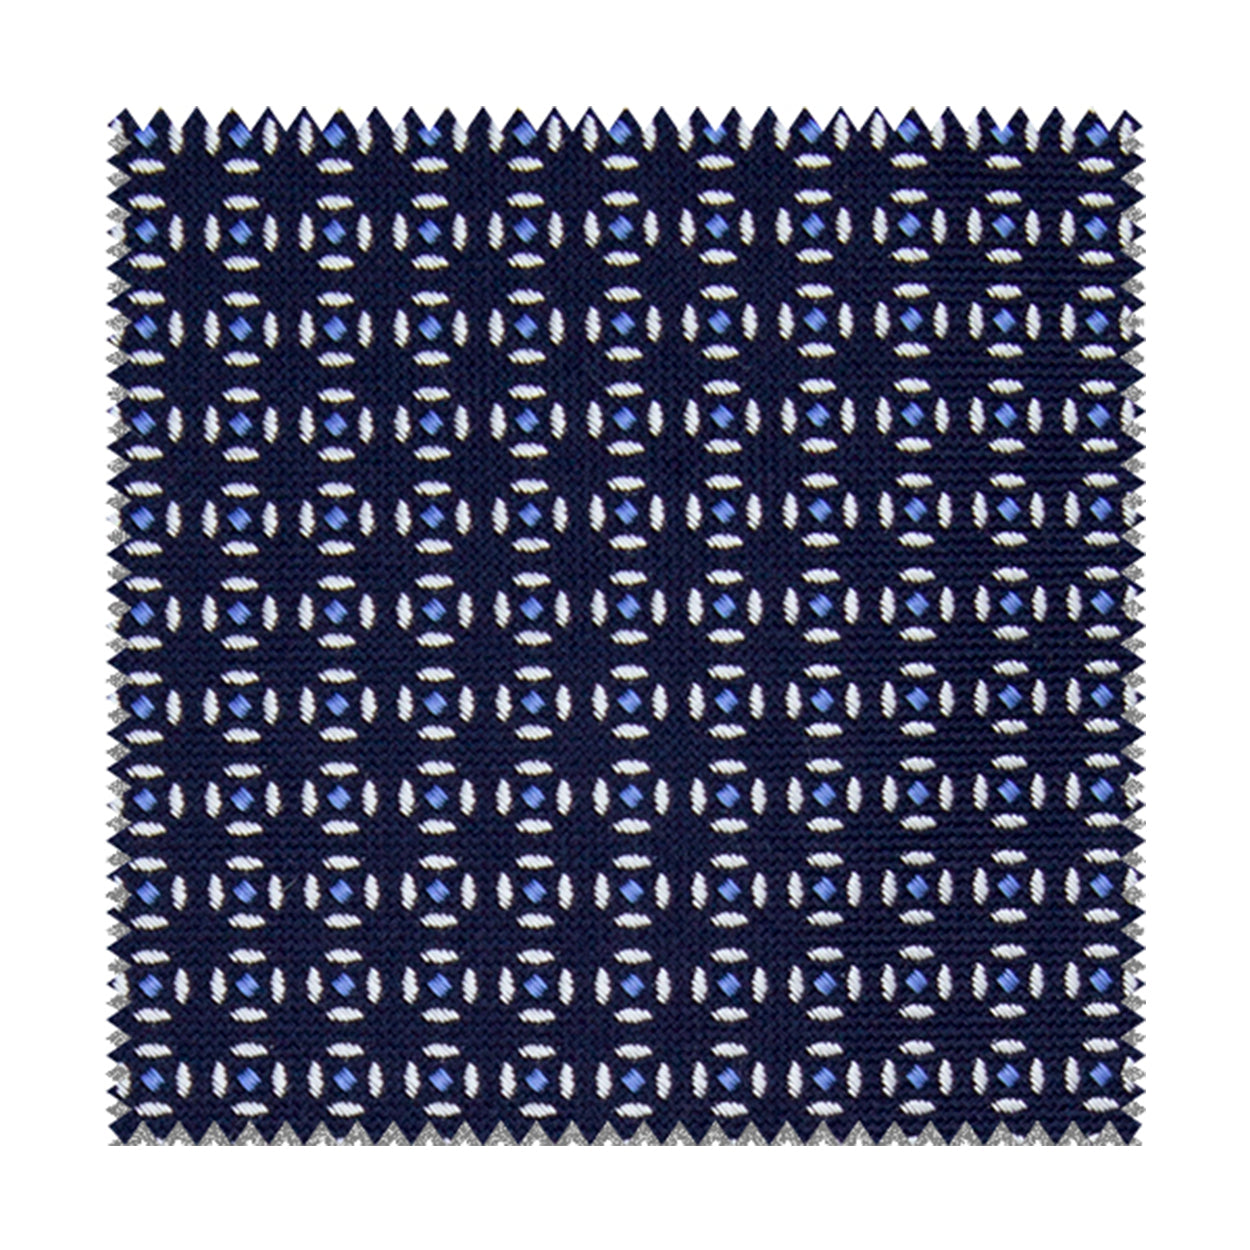 Blue fabric with white and light blue geometric pattern